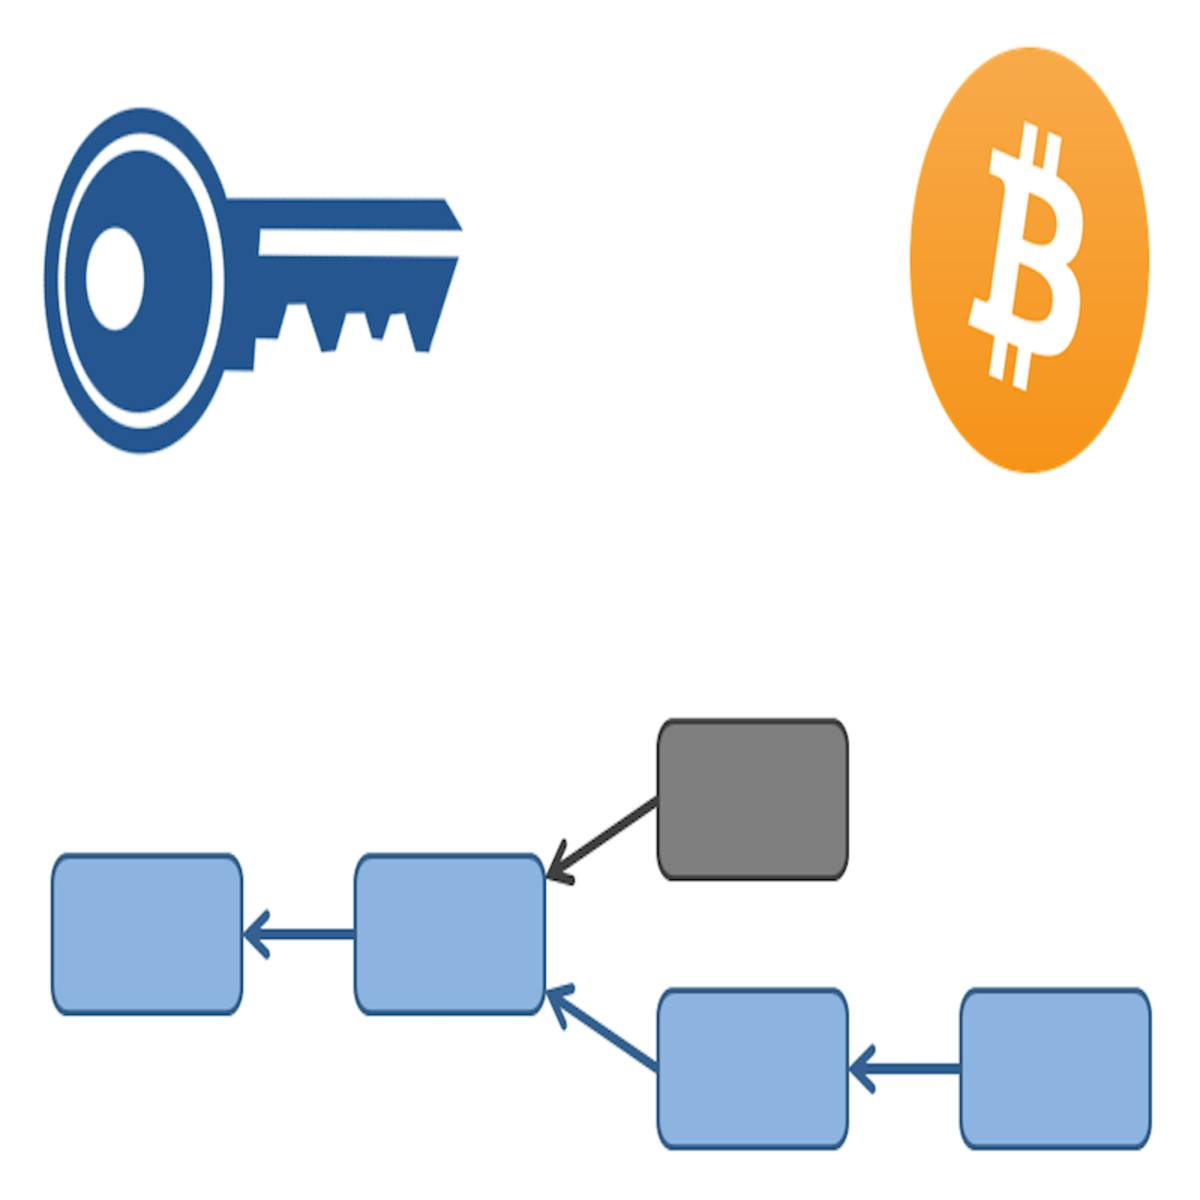 Learn details of cryptocurrency btc splut